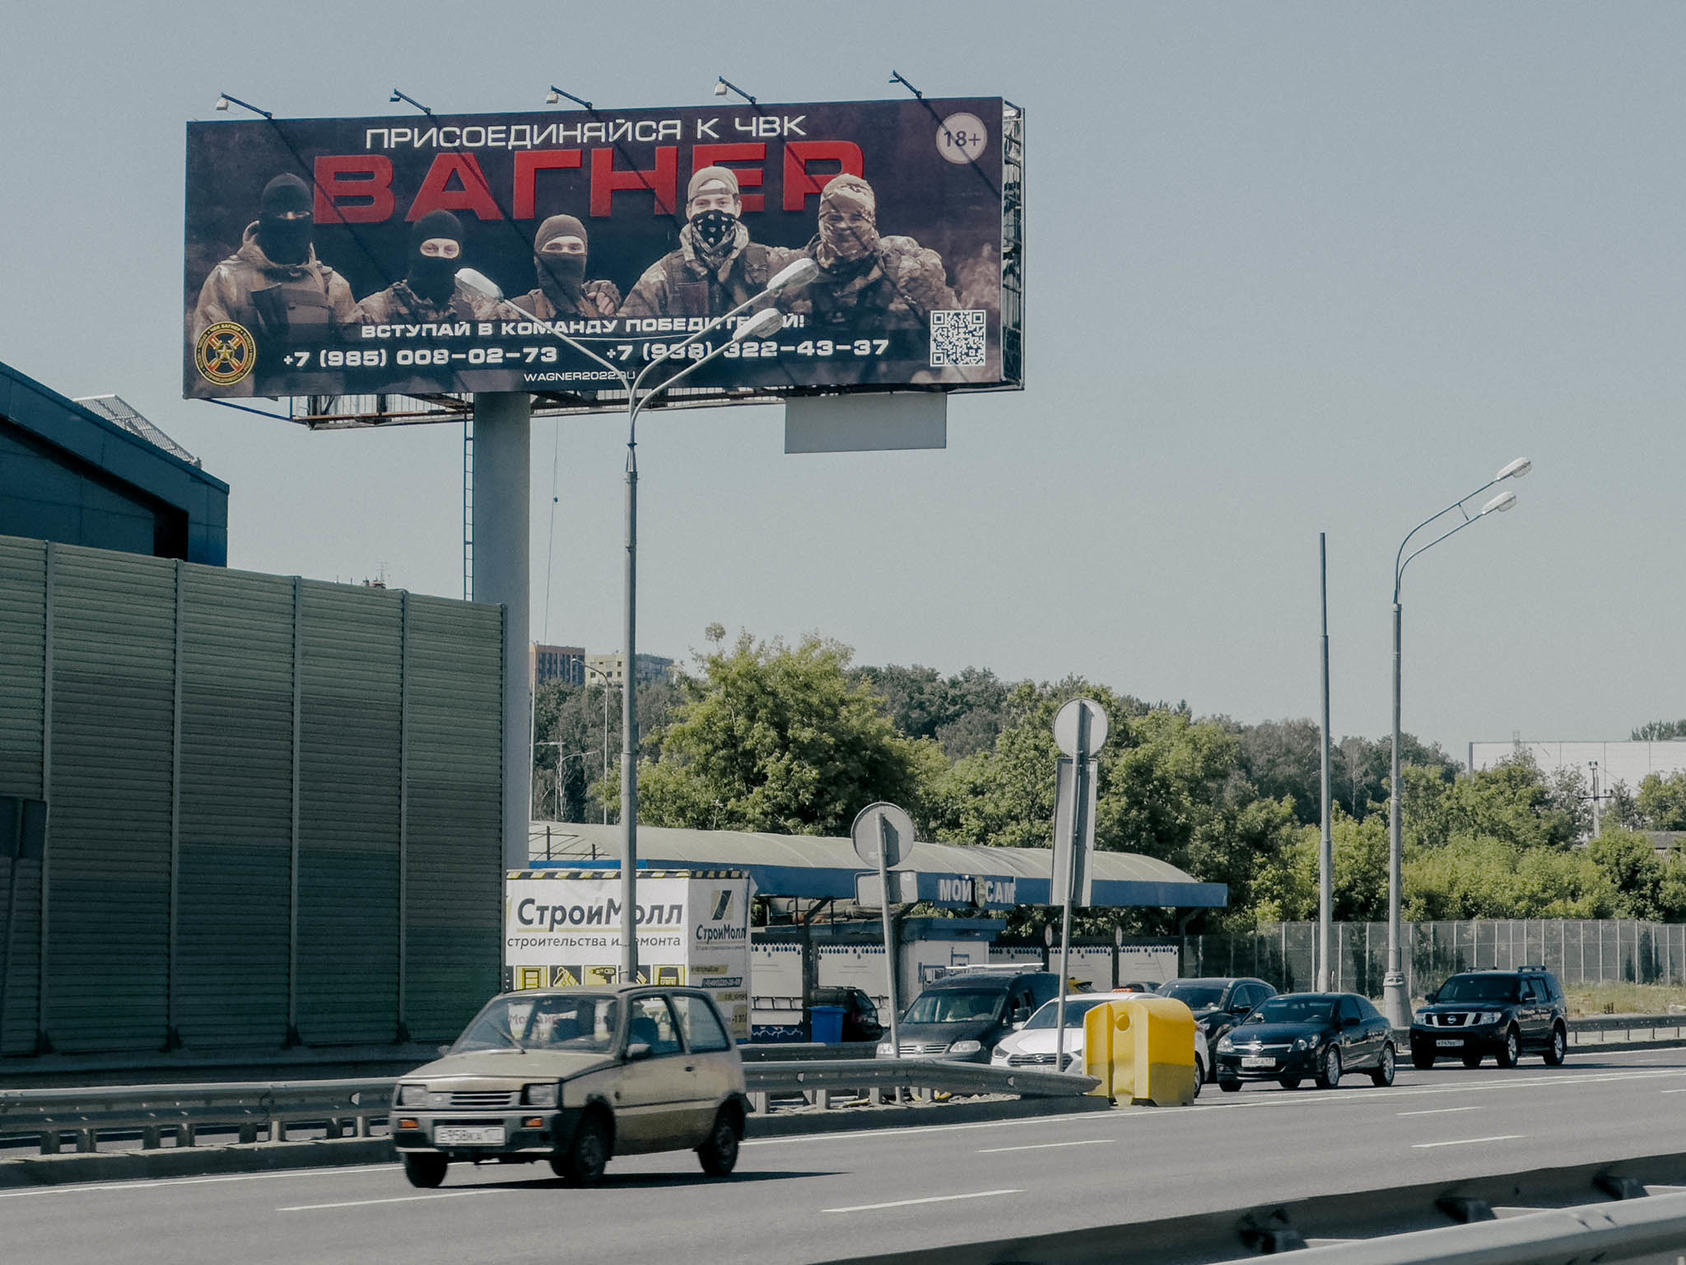 Masked fighters on a Moscow billboard invite recruits to the Wagner Group before its mutiny. Its founder, Yevgeniy Prigozhin, is campaigning to keep his role in running Wagner operations in conflict-torn African states. (Nanna Heitmann/The New York Times)